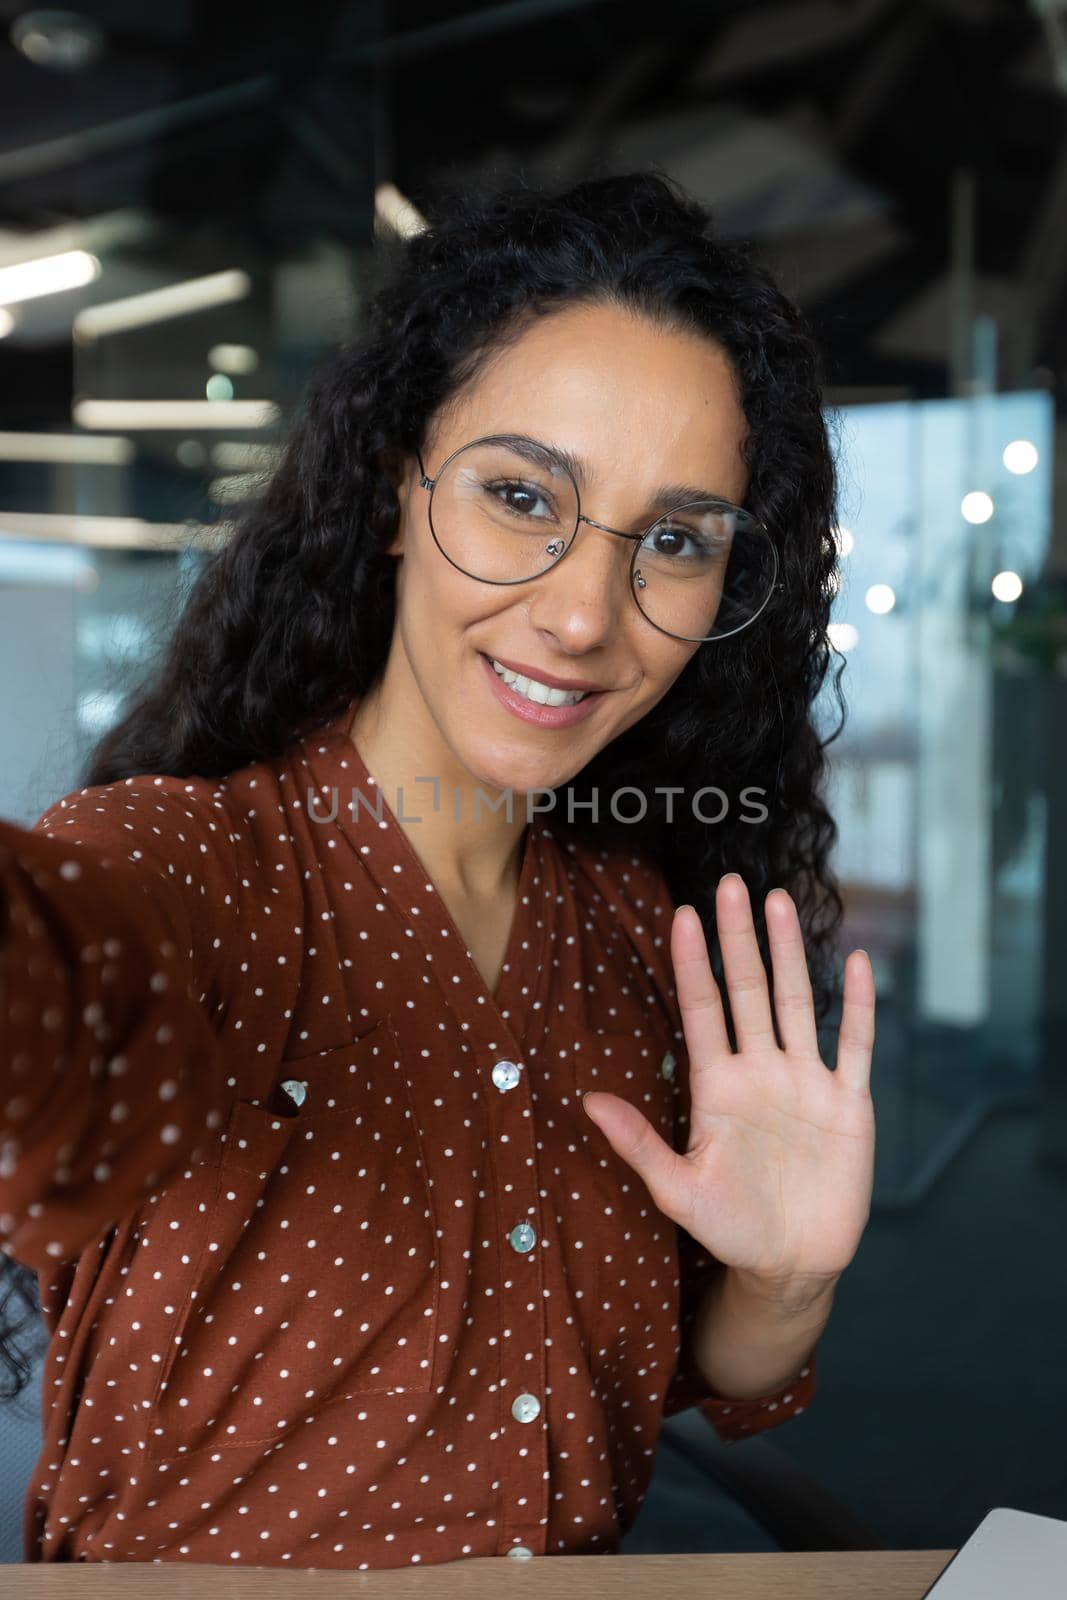 Vertical shot, young beautiful Hispanic business woman with curly hair talking on video call by voronaman